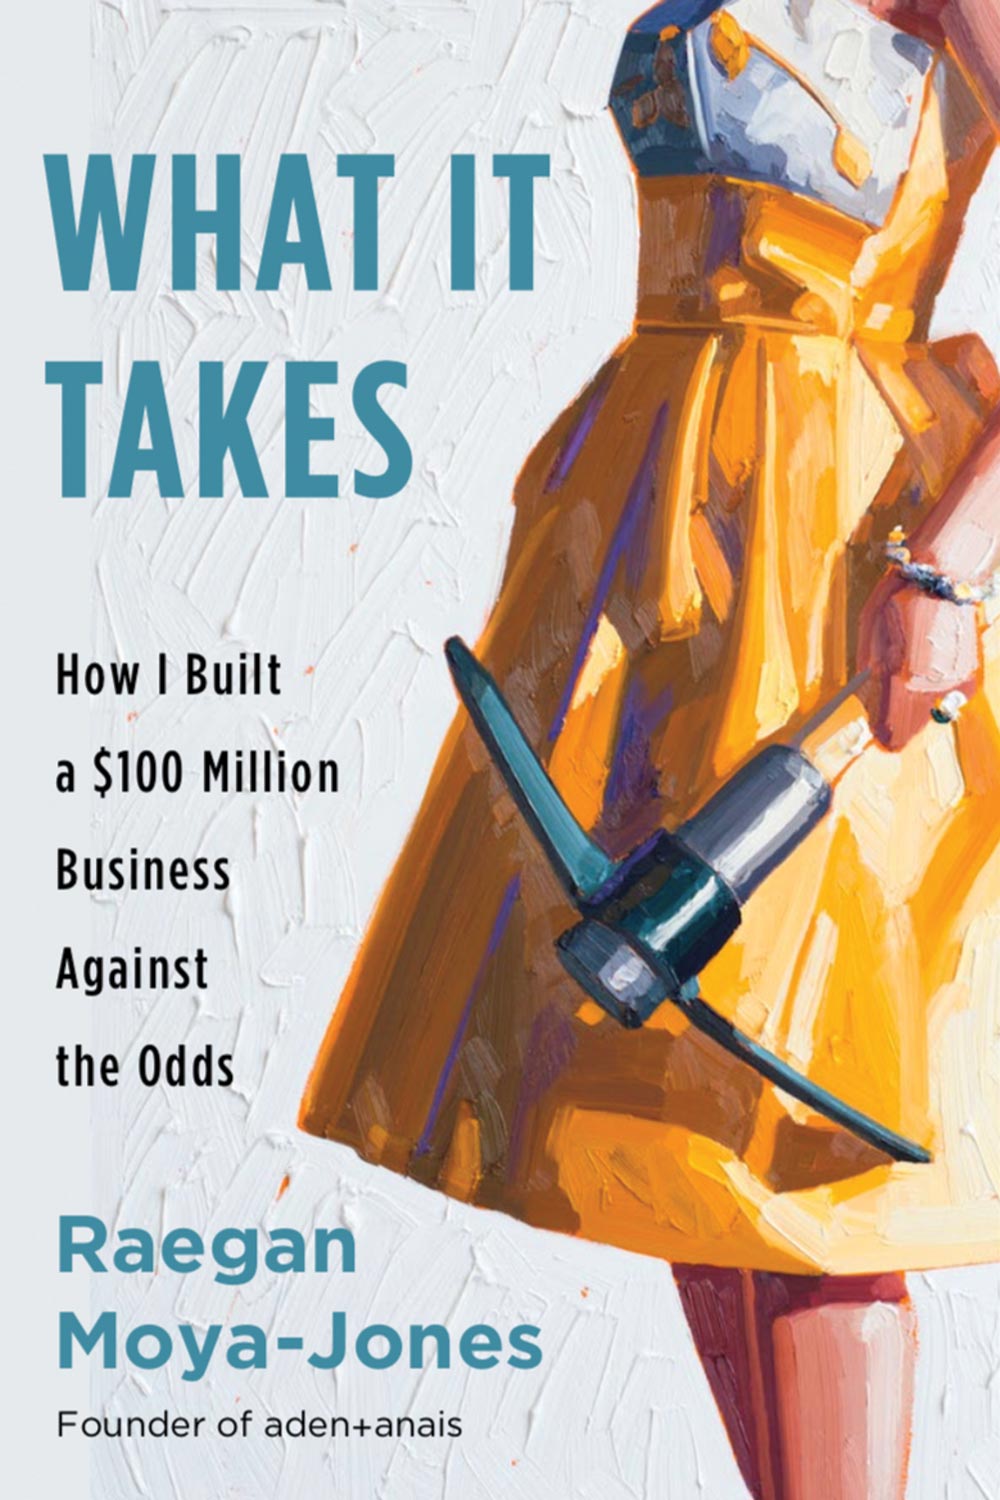 What it takes book cover